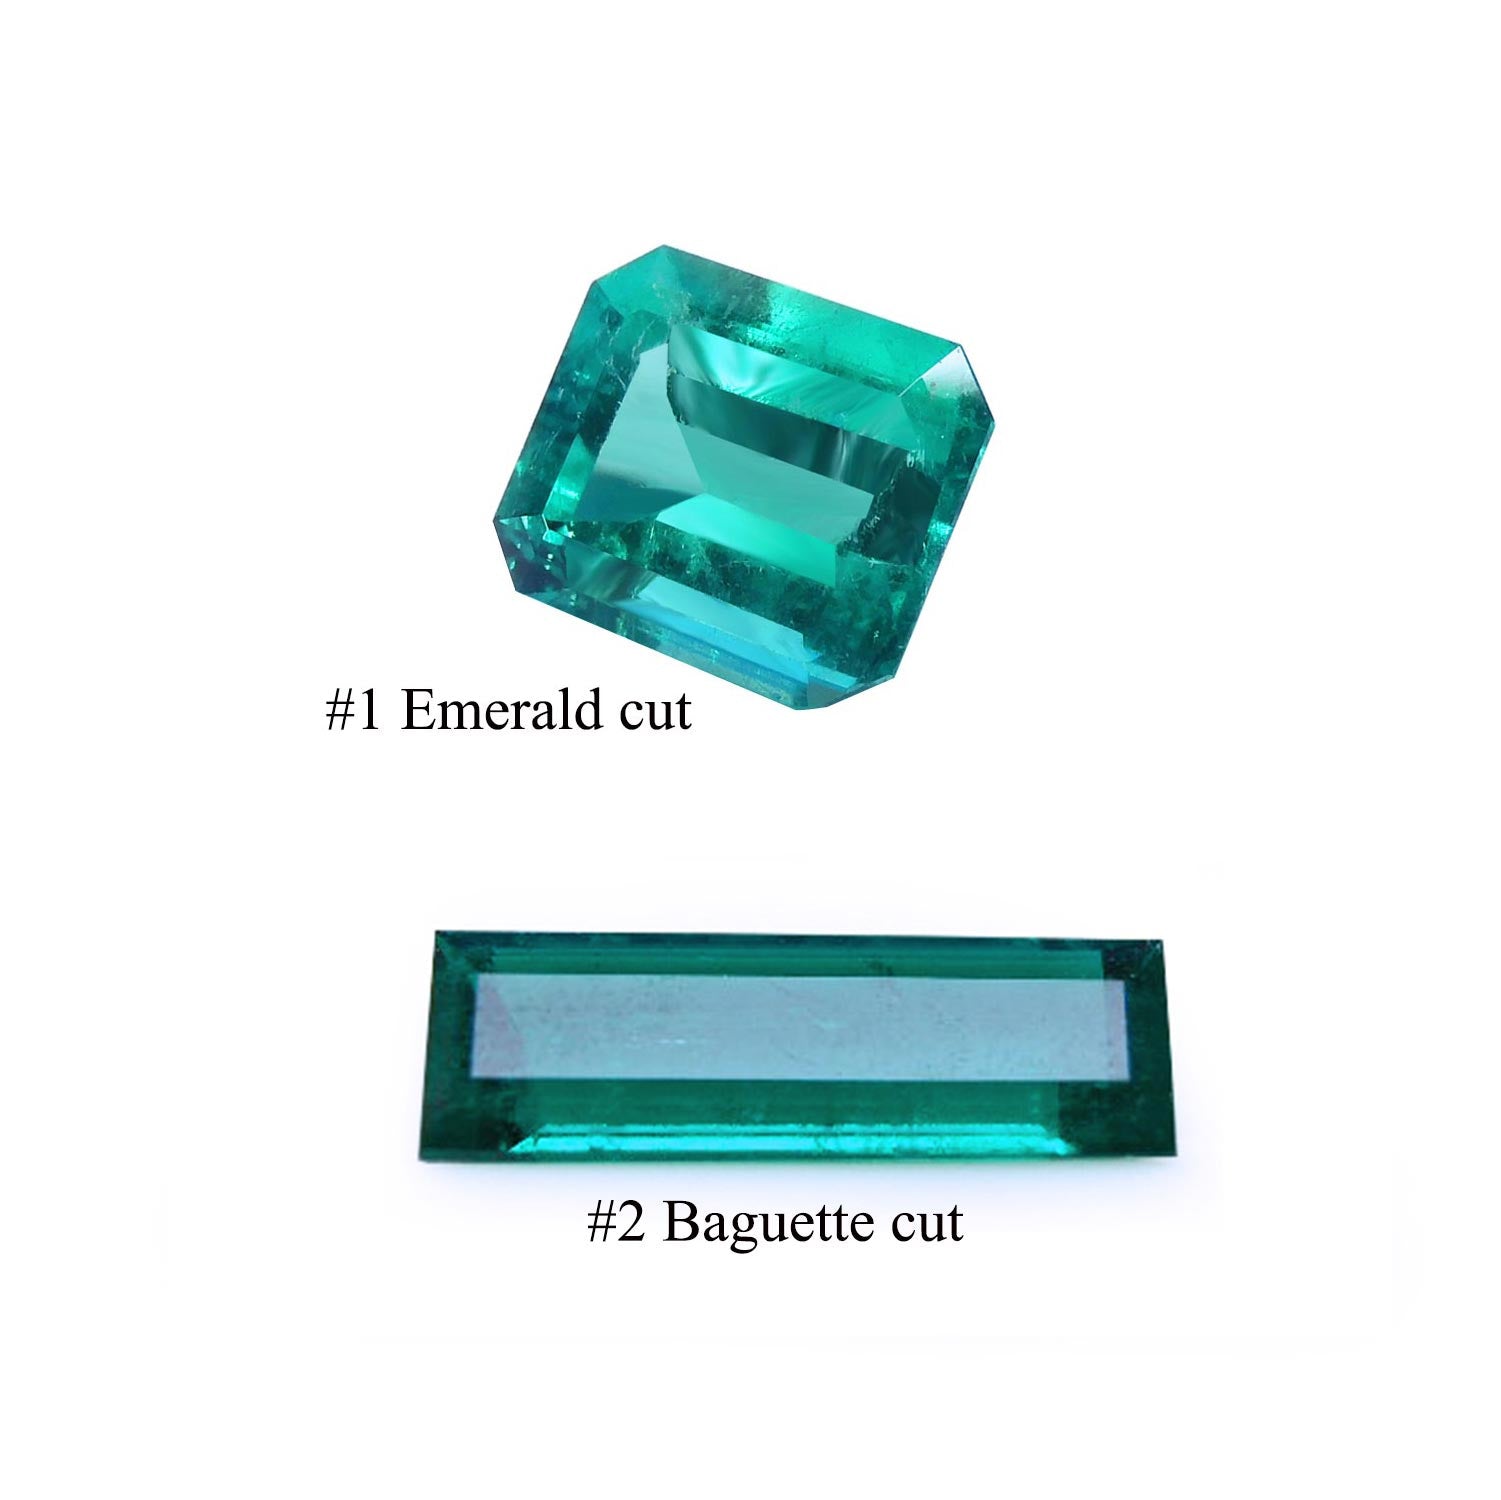 The price for emeralds on color and transparency